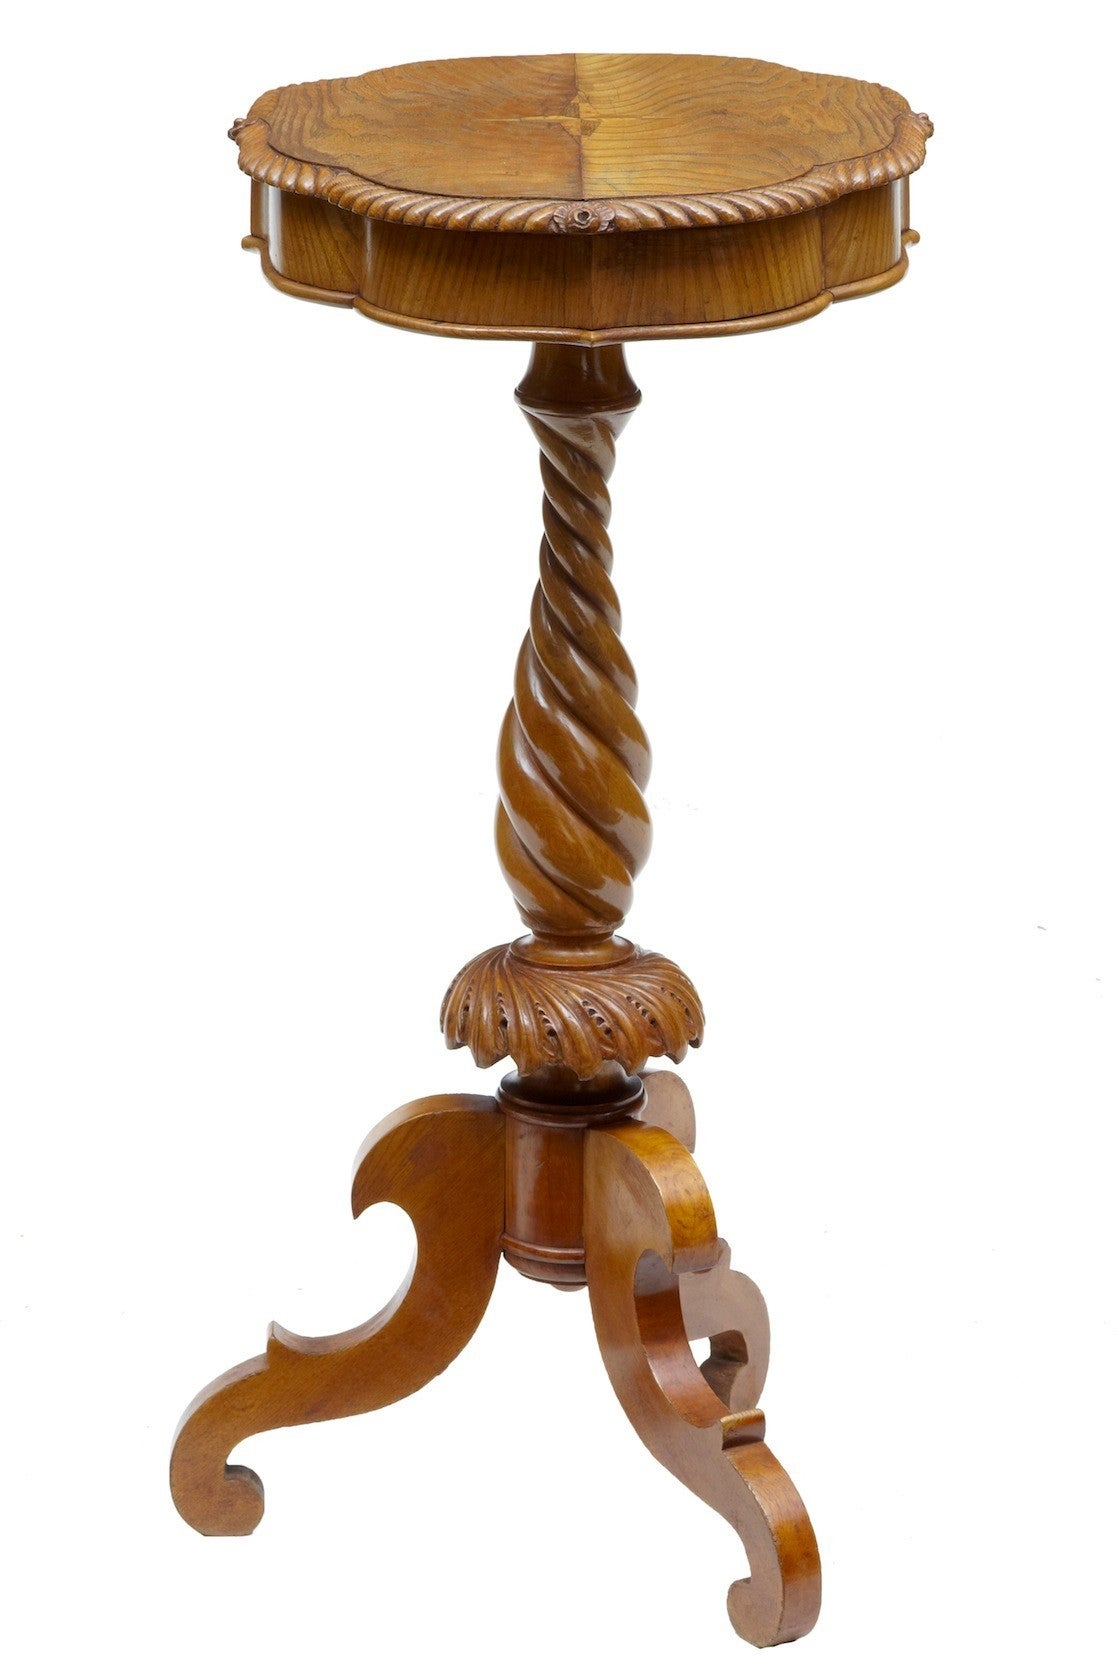 Carved elm occasional table, circa 1890. 

Shaped scalloped edge, standing on turned stem and tripod legs.

Measures: Height: 30 3/4